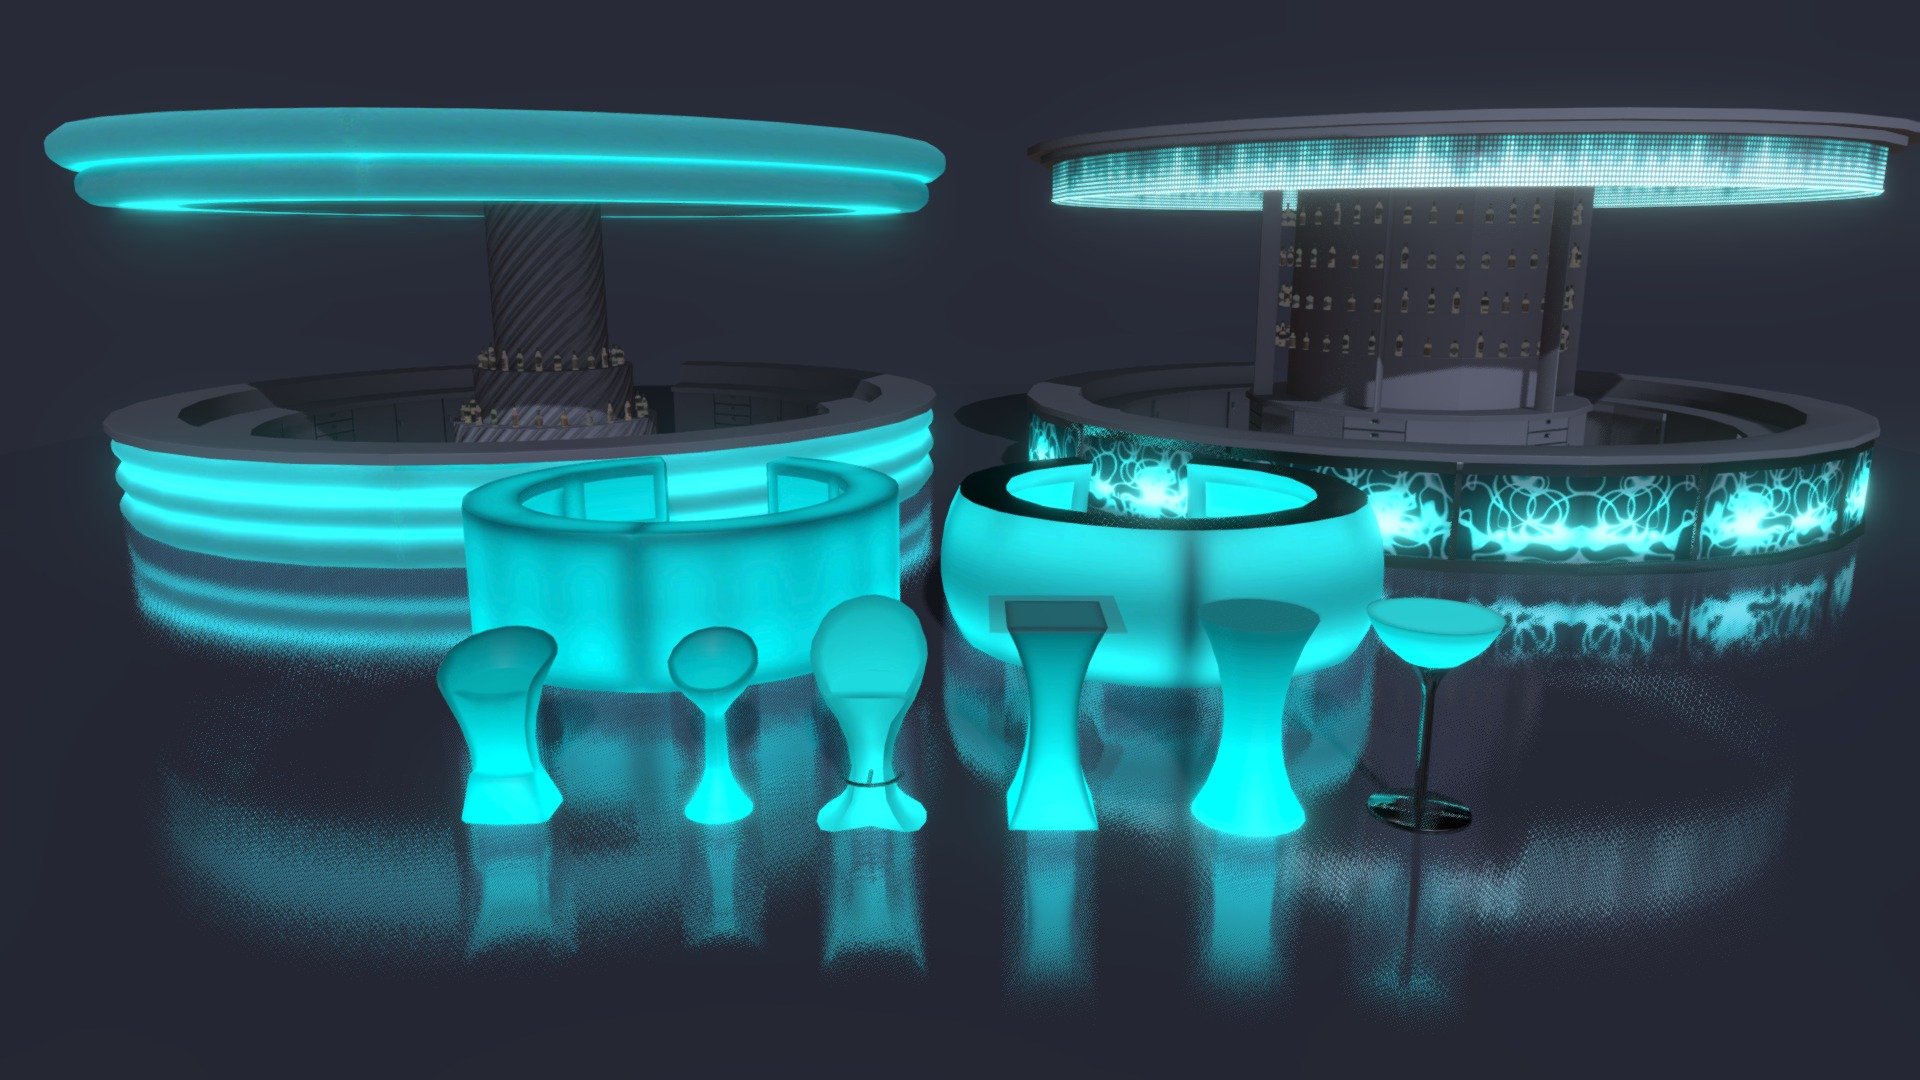 Collection of led bars, chairs and tables for nightclub, pub, lounge bar

Full version - Led bars - 3D model by TirgamesAssets 3d model